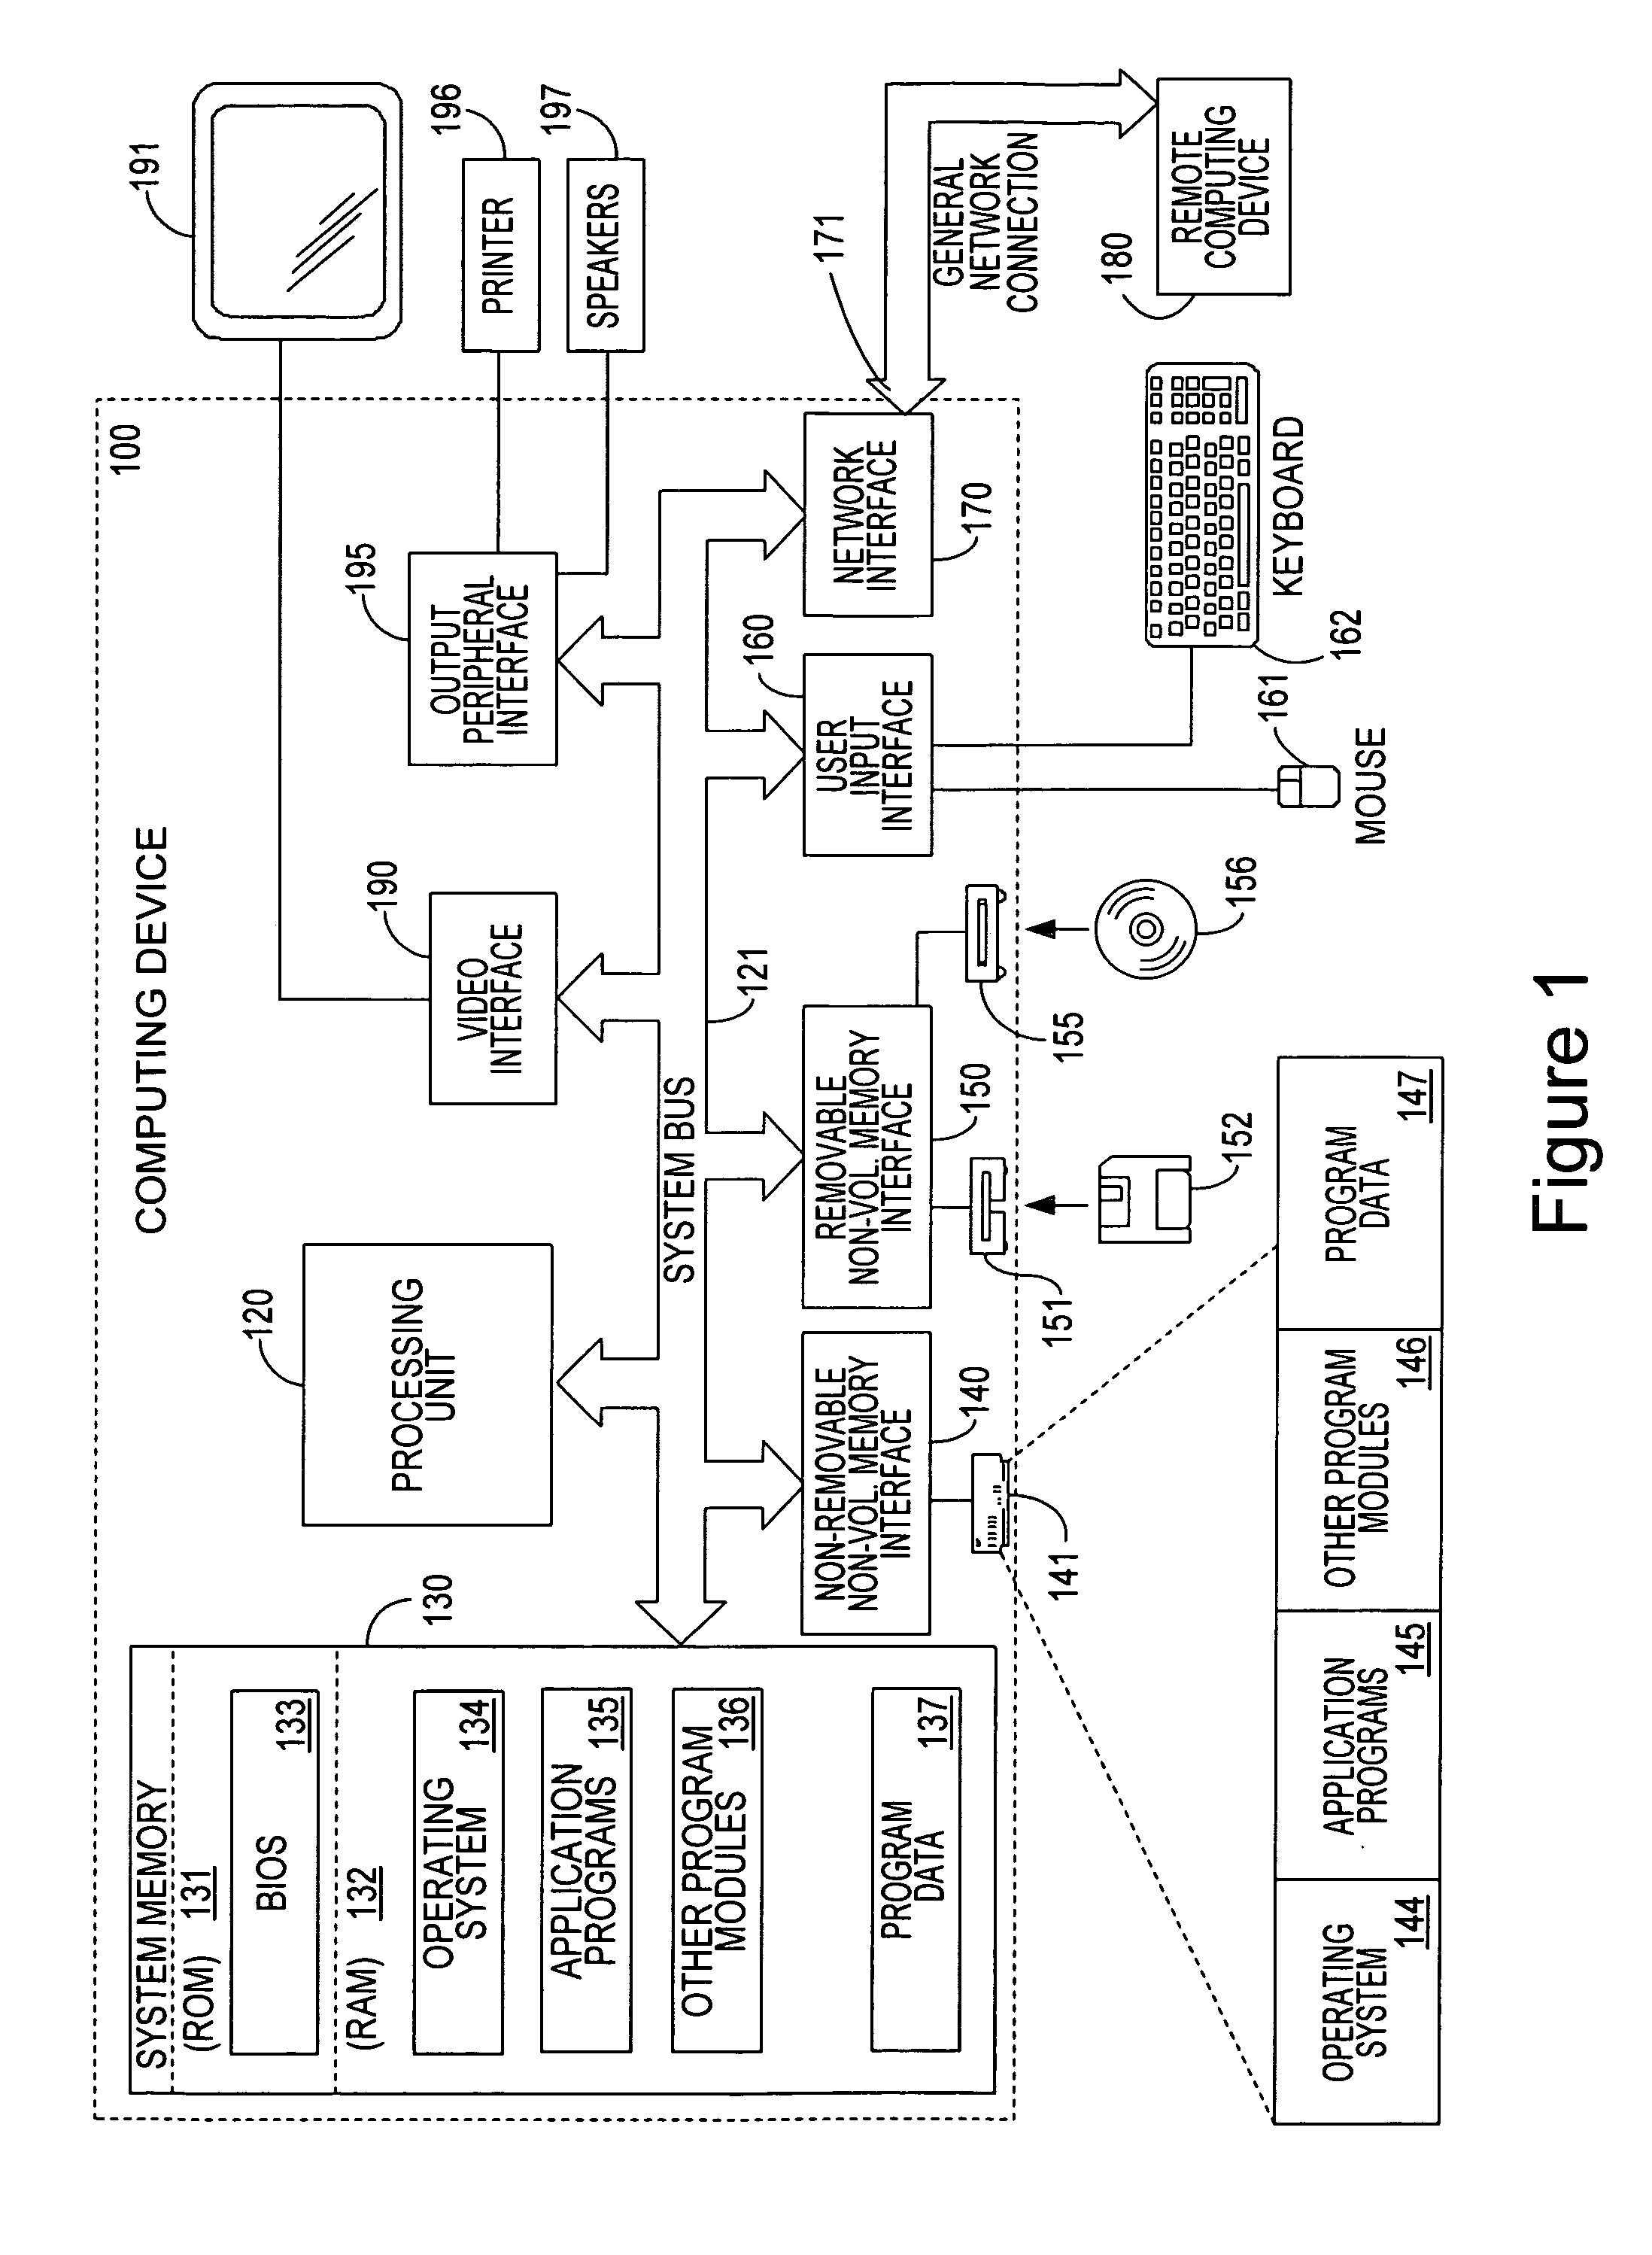 Unified congestion notification mechanism for reliable and unreliable protocols by augmenting ECN